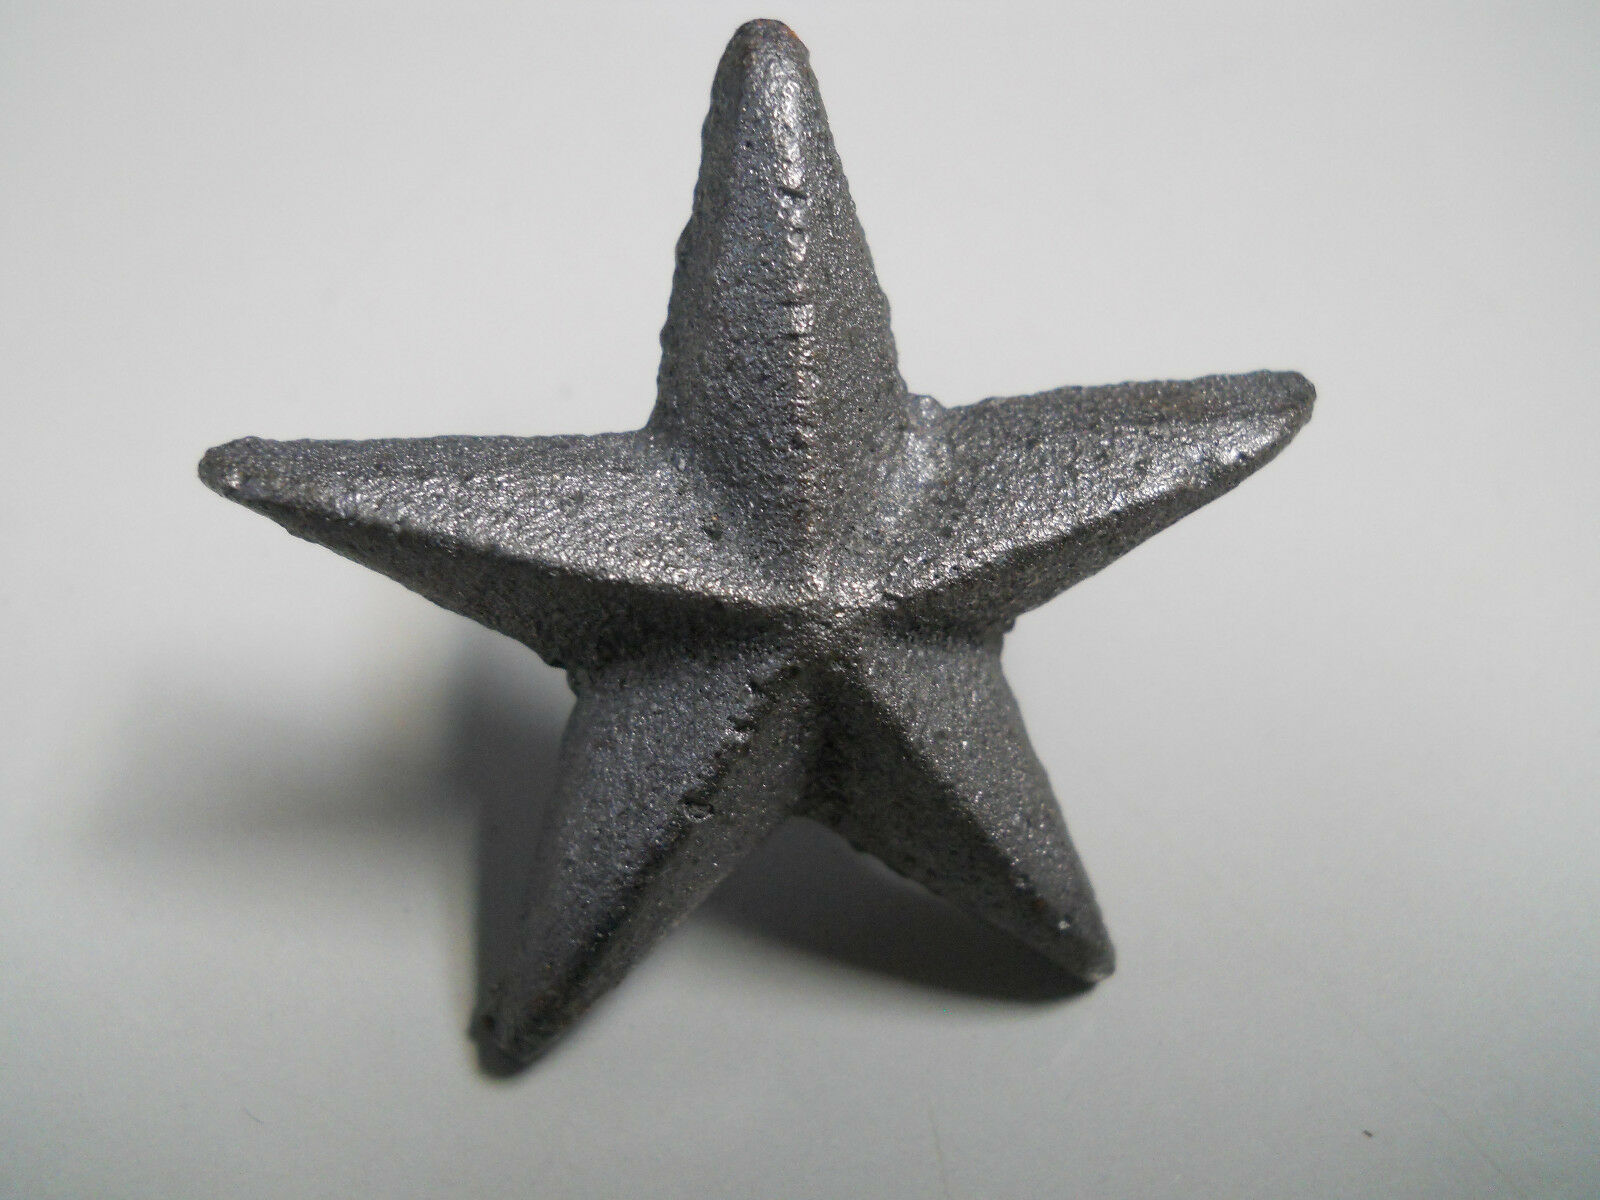 12 Cast Iron Nail Stars Architectural Washer Tackstexas Lone Star Rustic Ranch